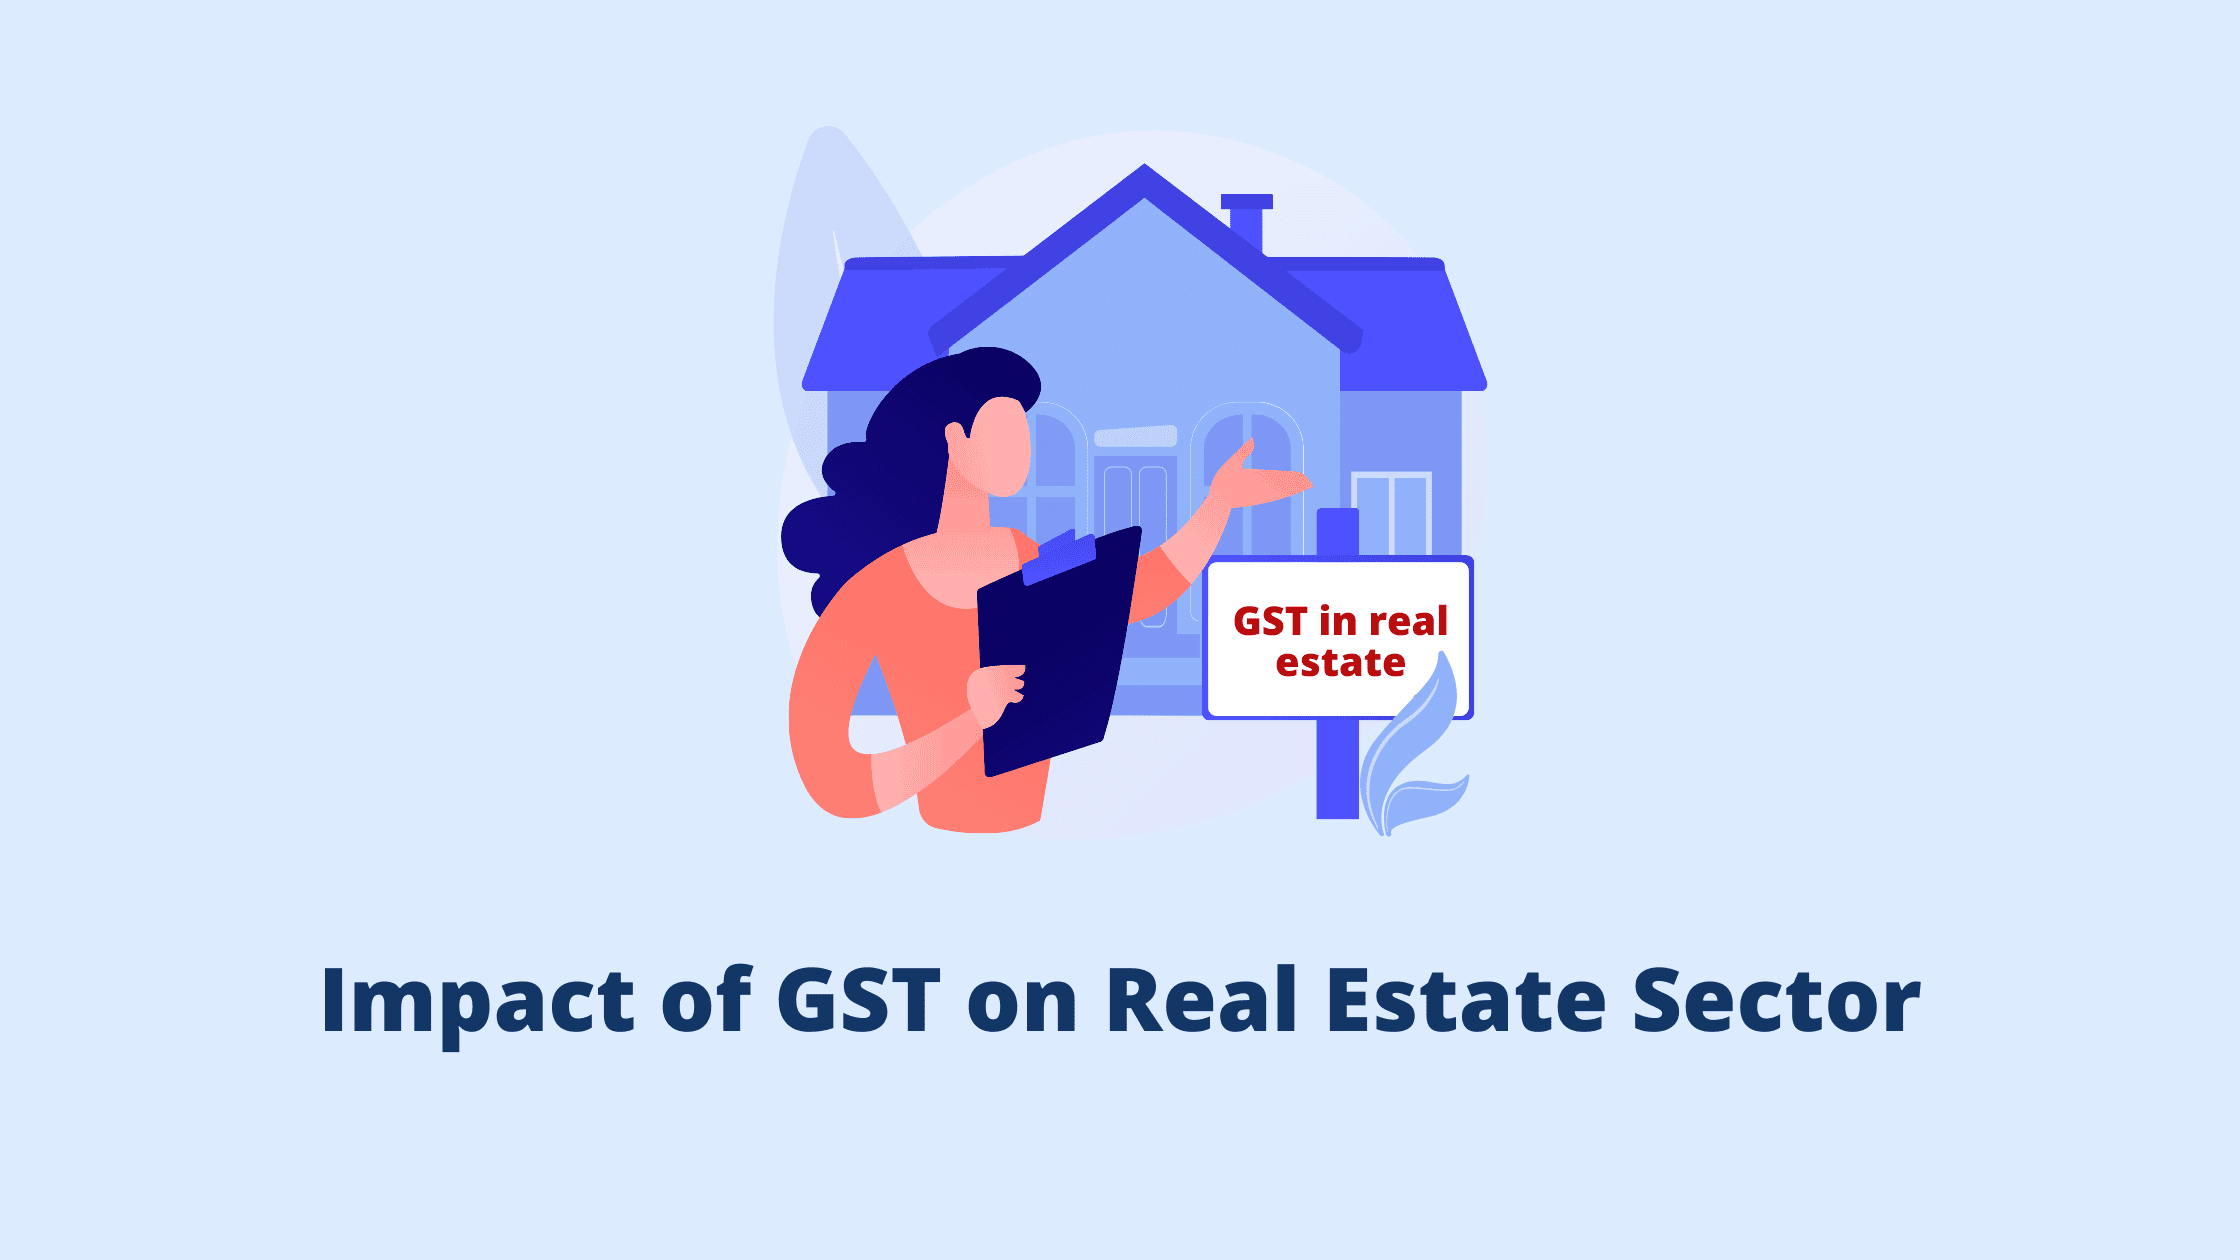 Impact of GST on Real Estate Sector